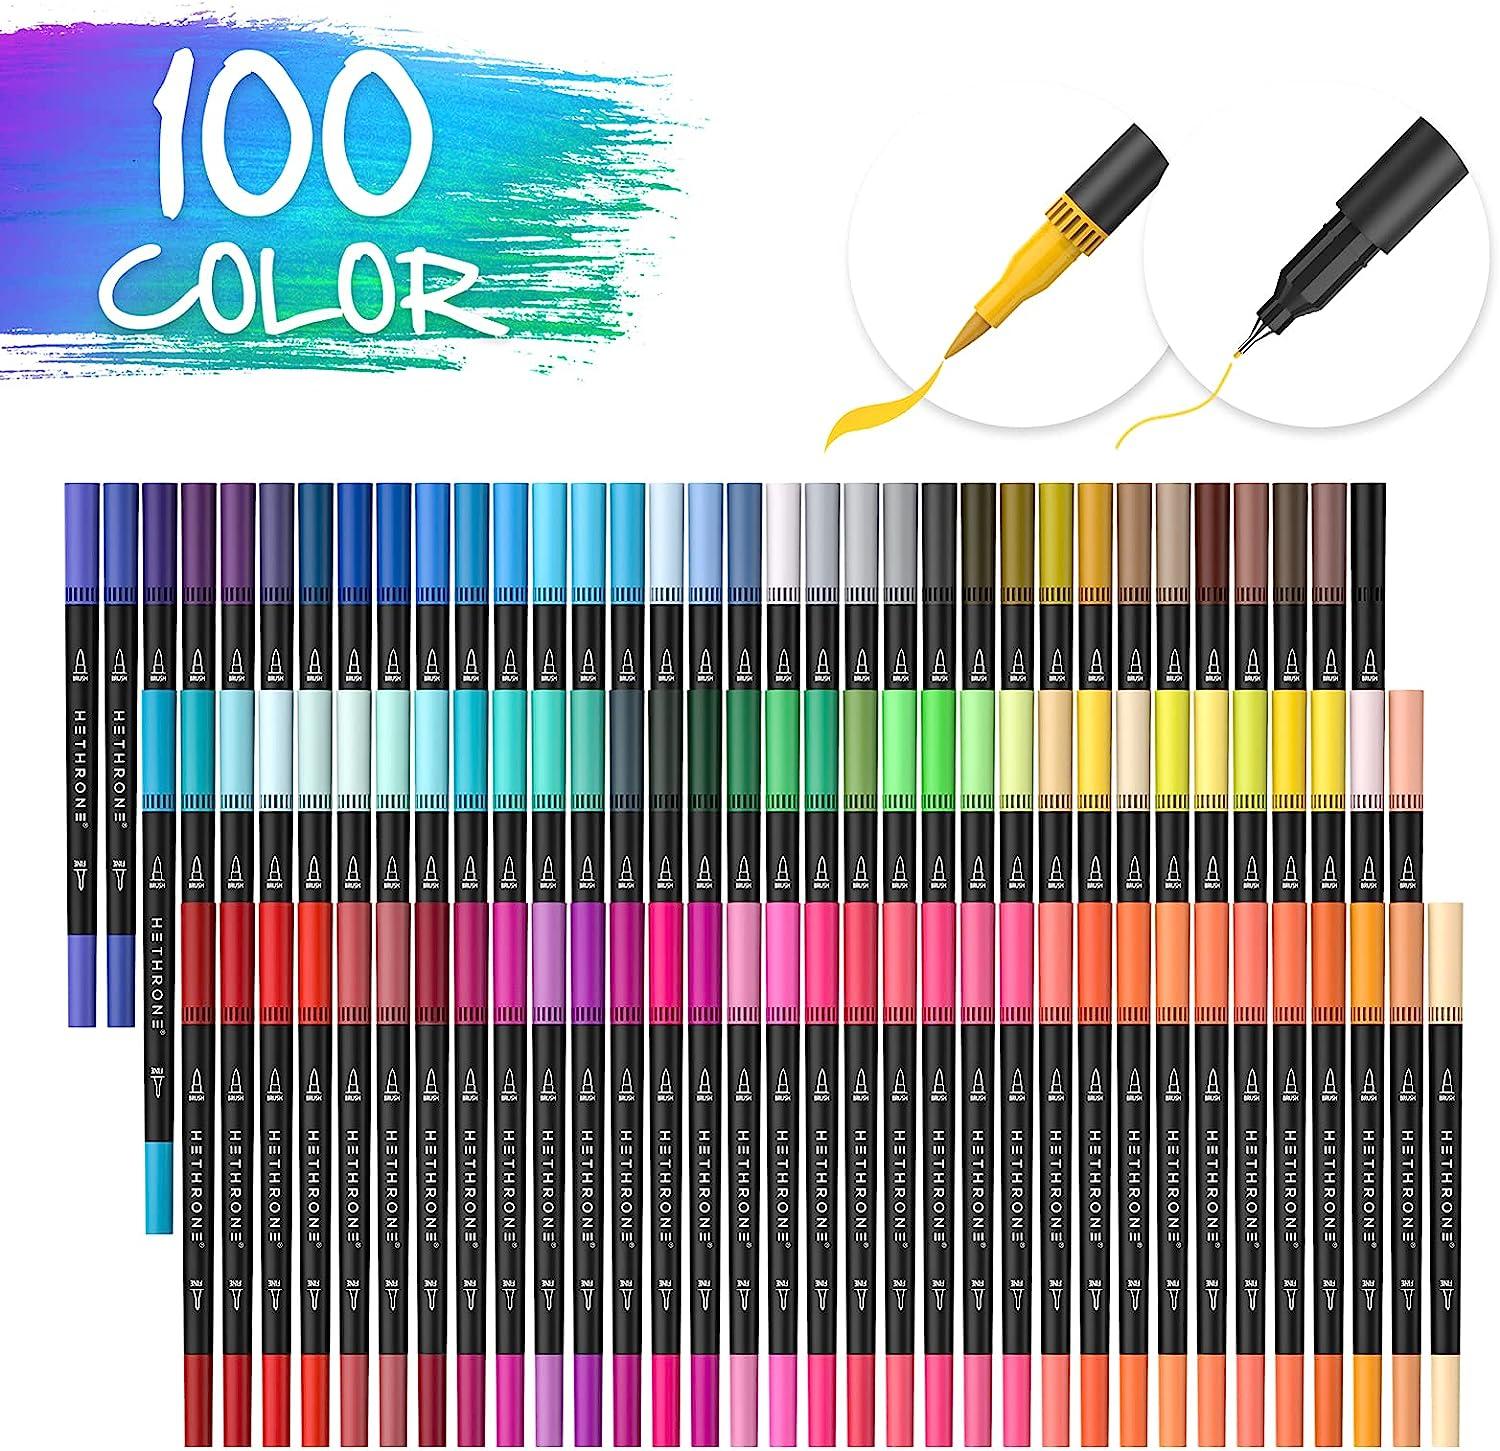 Hethrone Markers for Adult Coloring - 100 Colors Dual Tip Brush